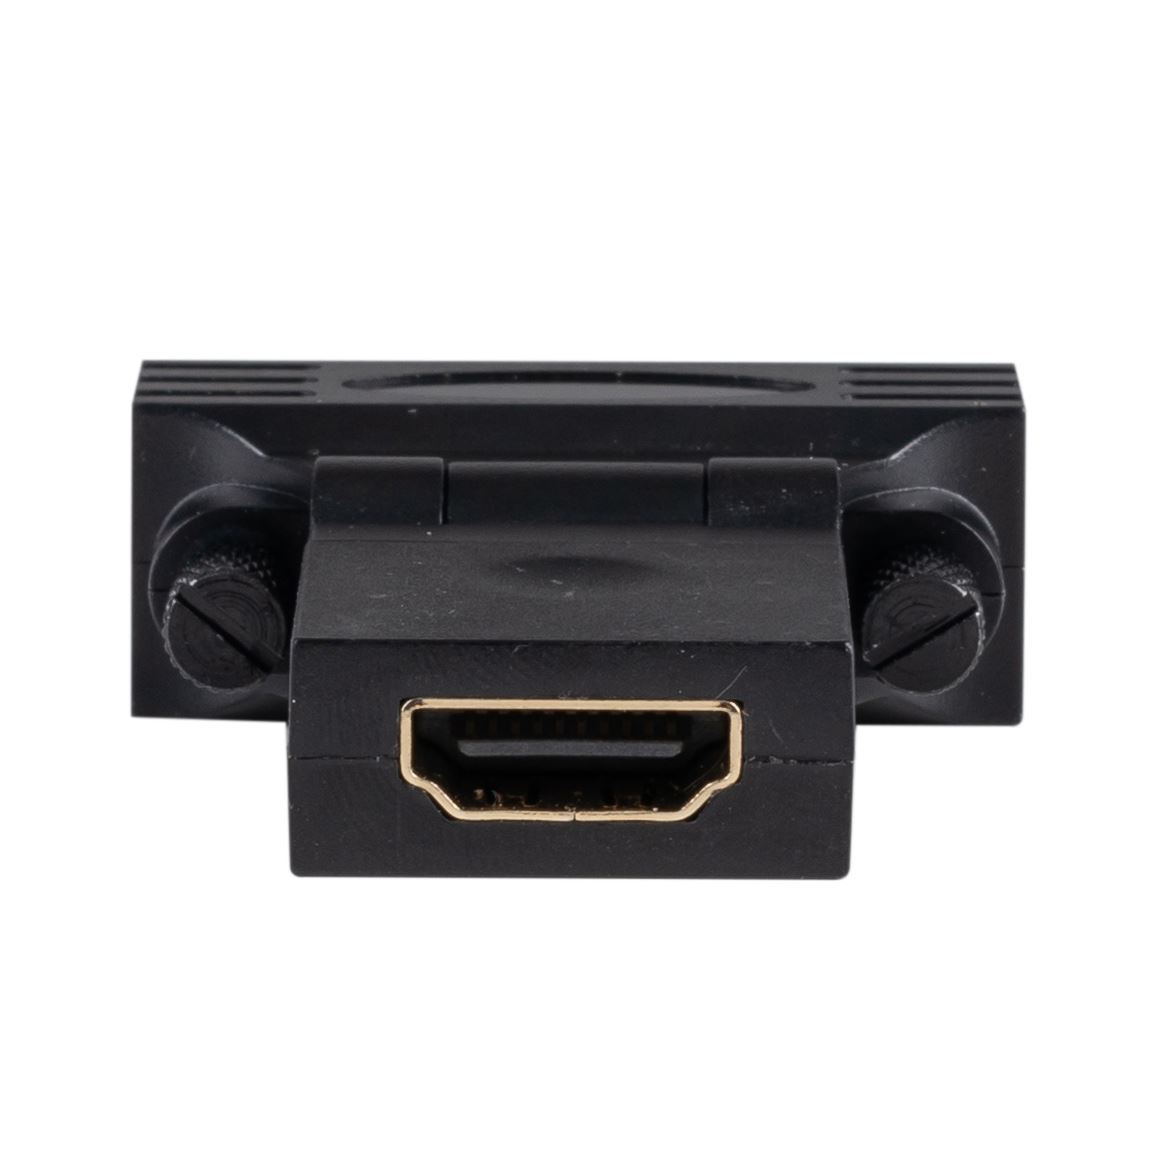 DYNAMIX_HDMI_Female_to_DVI-D_(24+1)_Male_Swivel_Adapter._Supports_up_to_2560x1440@60Hz 67